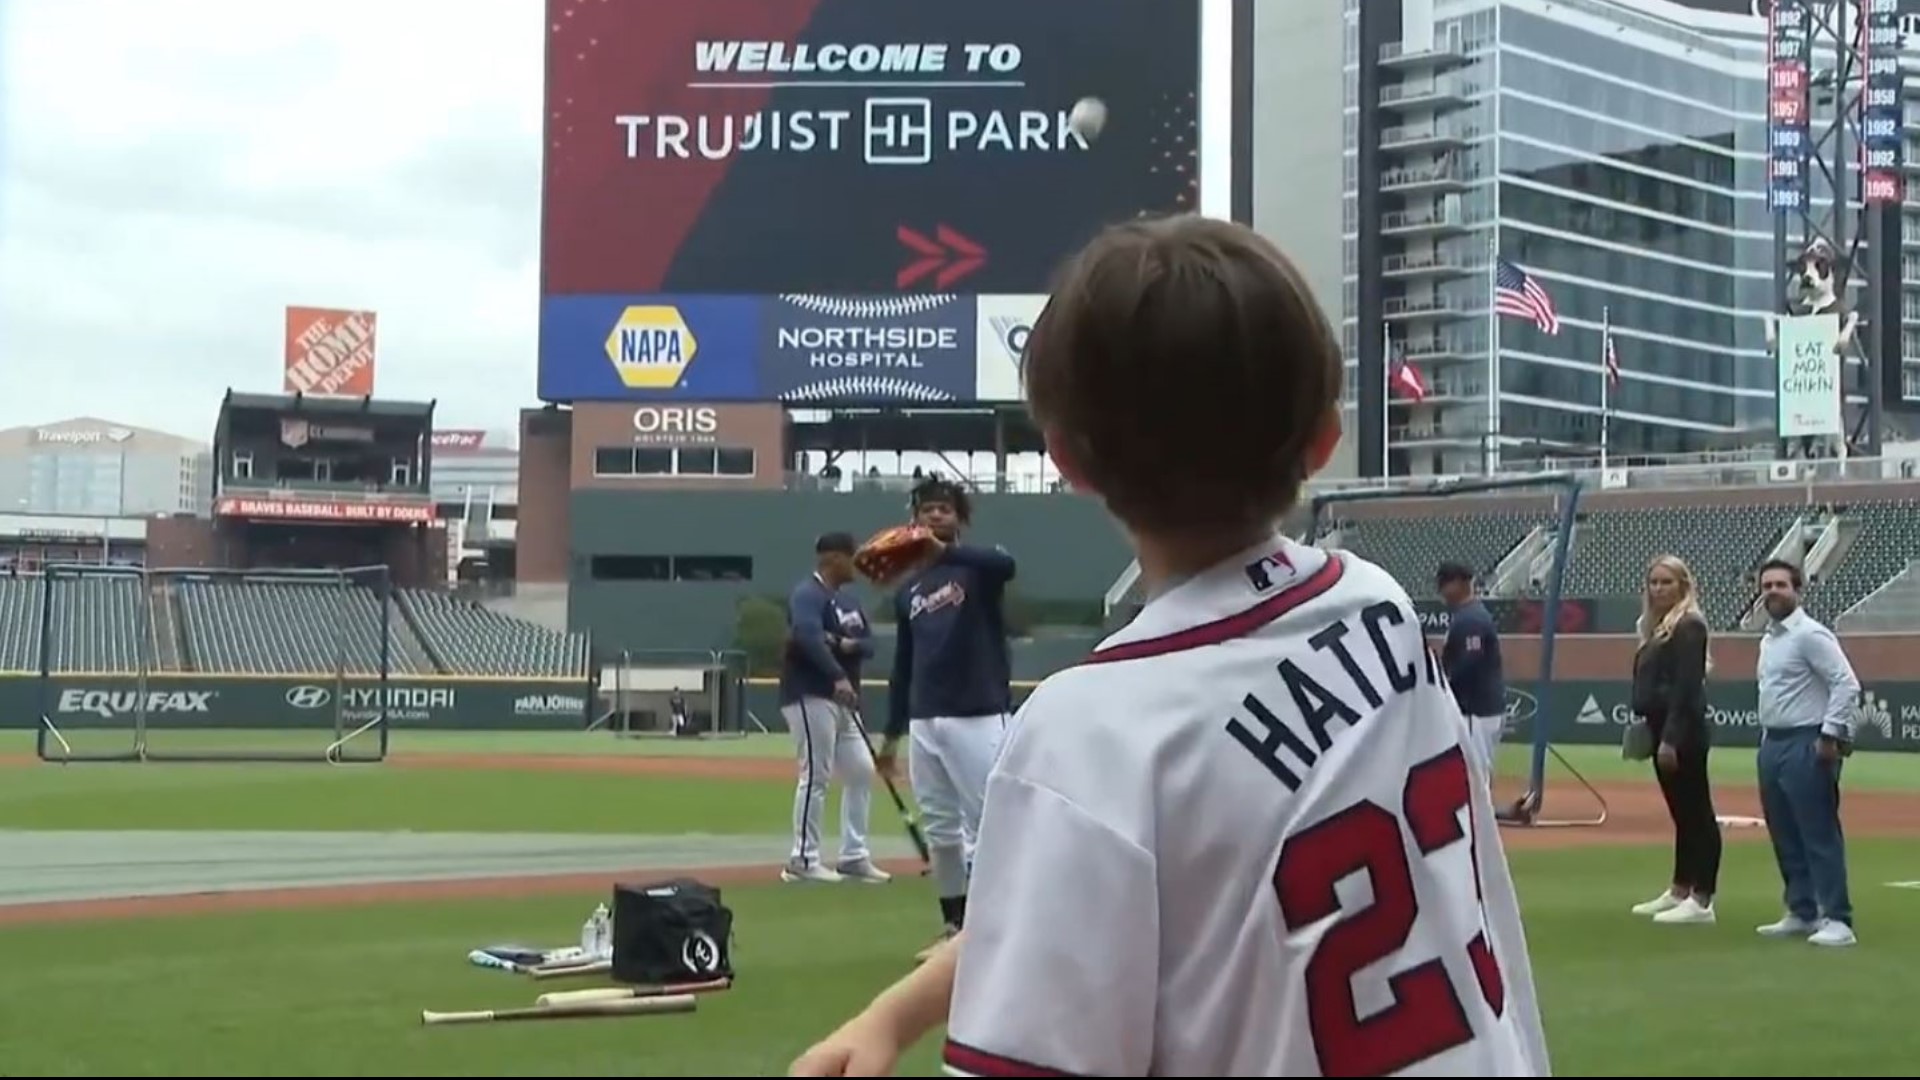 The Atlanta Braves is granting the wish of Sam Hatch who has beat his battle with a rare type of skin cancer. He will play catch with Ronald Acuña Jr Friday.